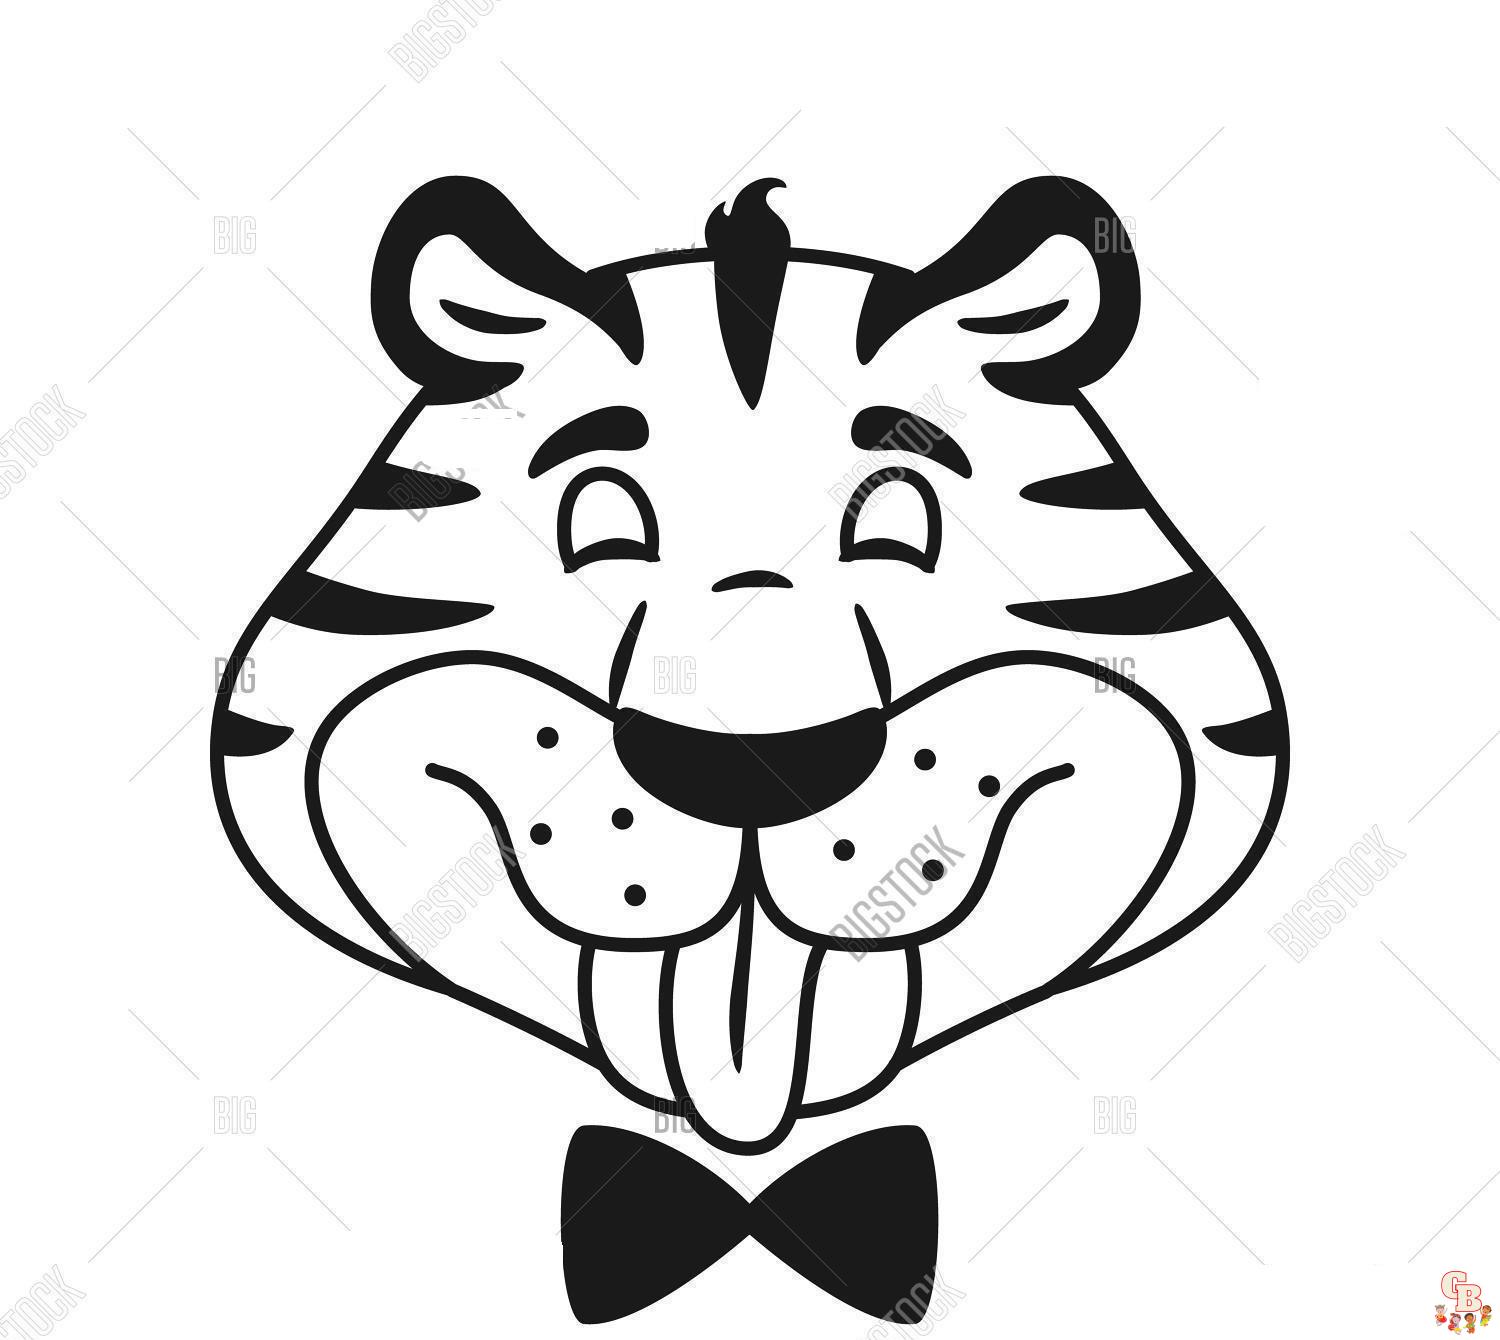 Enjoy Coloring Happy Face Tiger Coloring Pages with GBcoloring